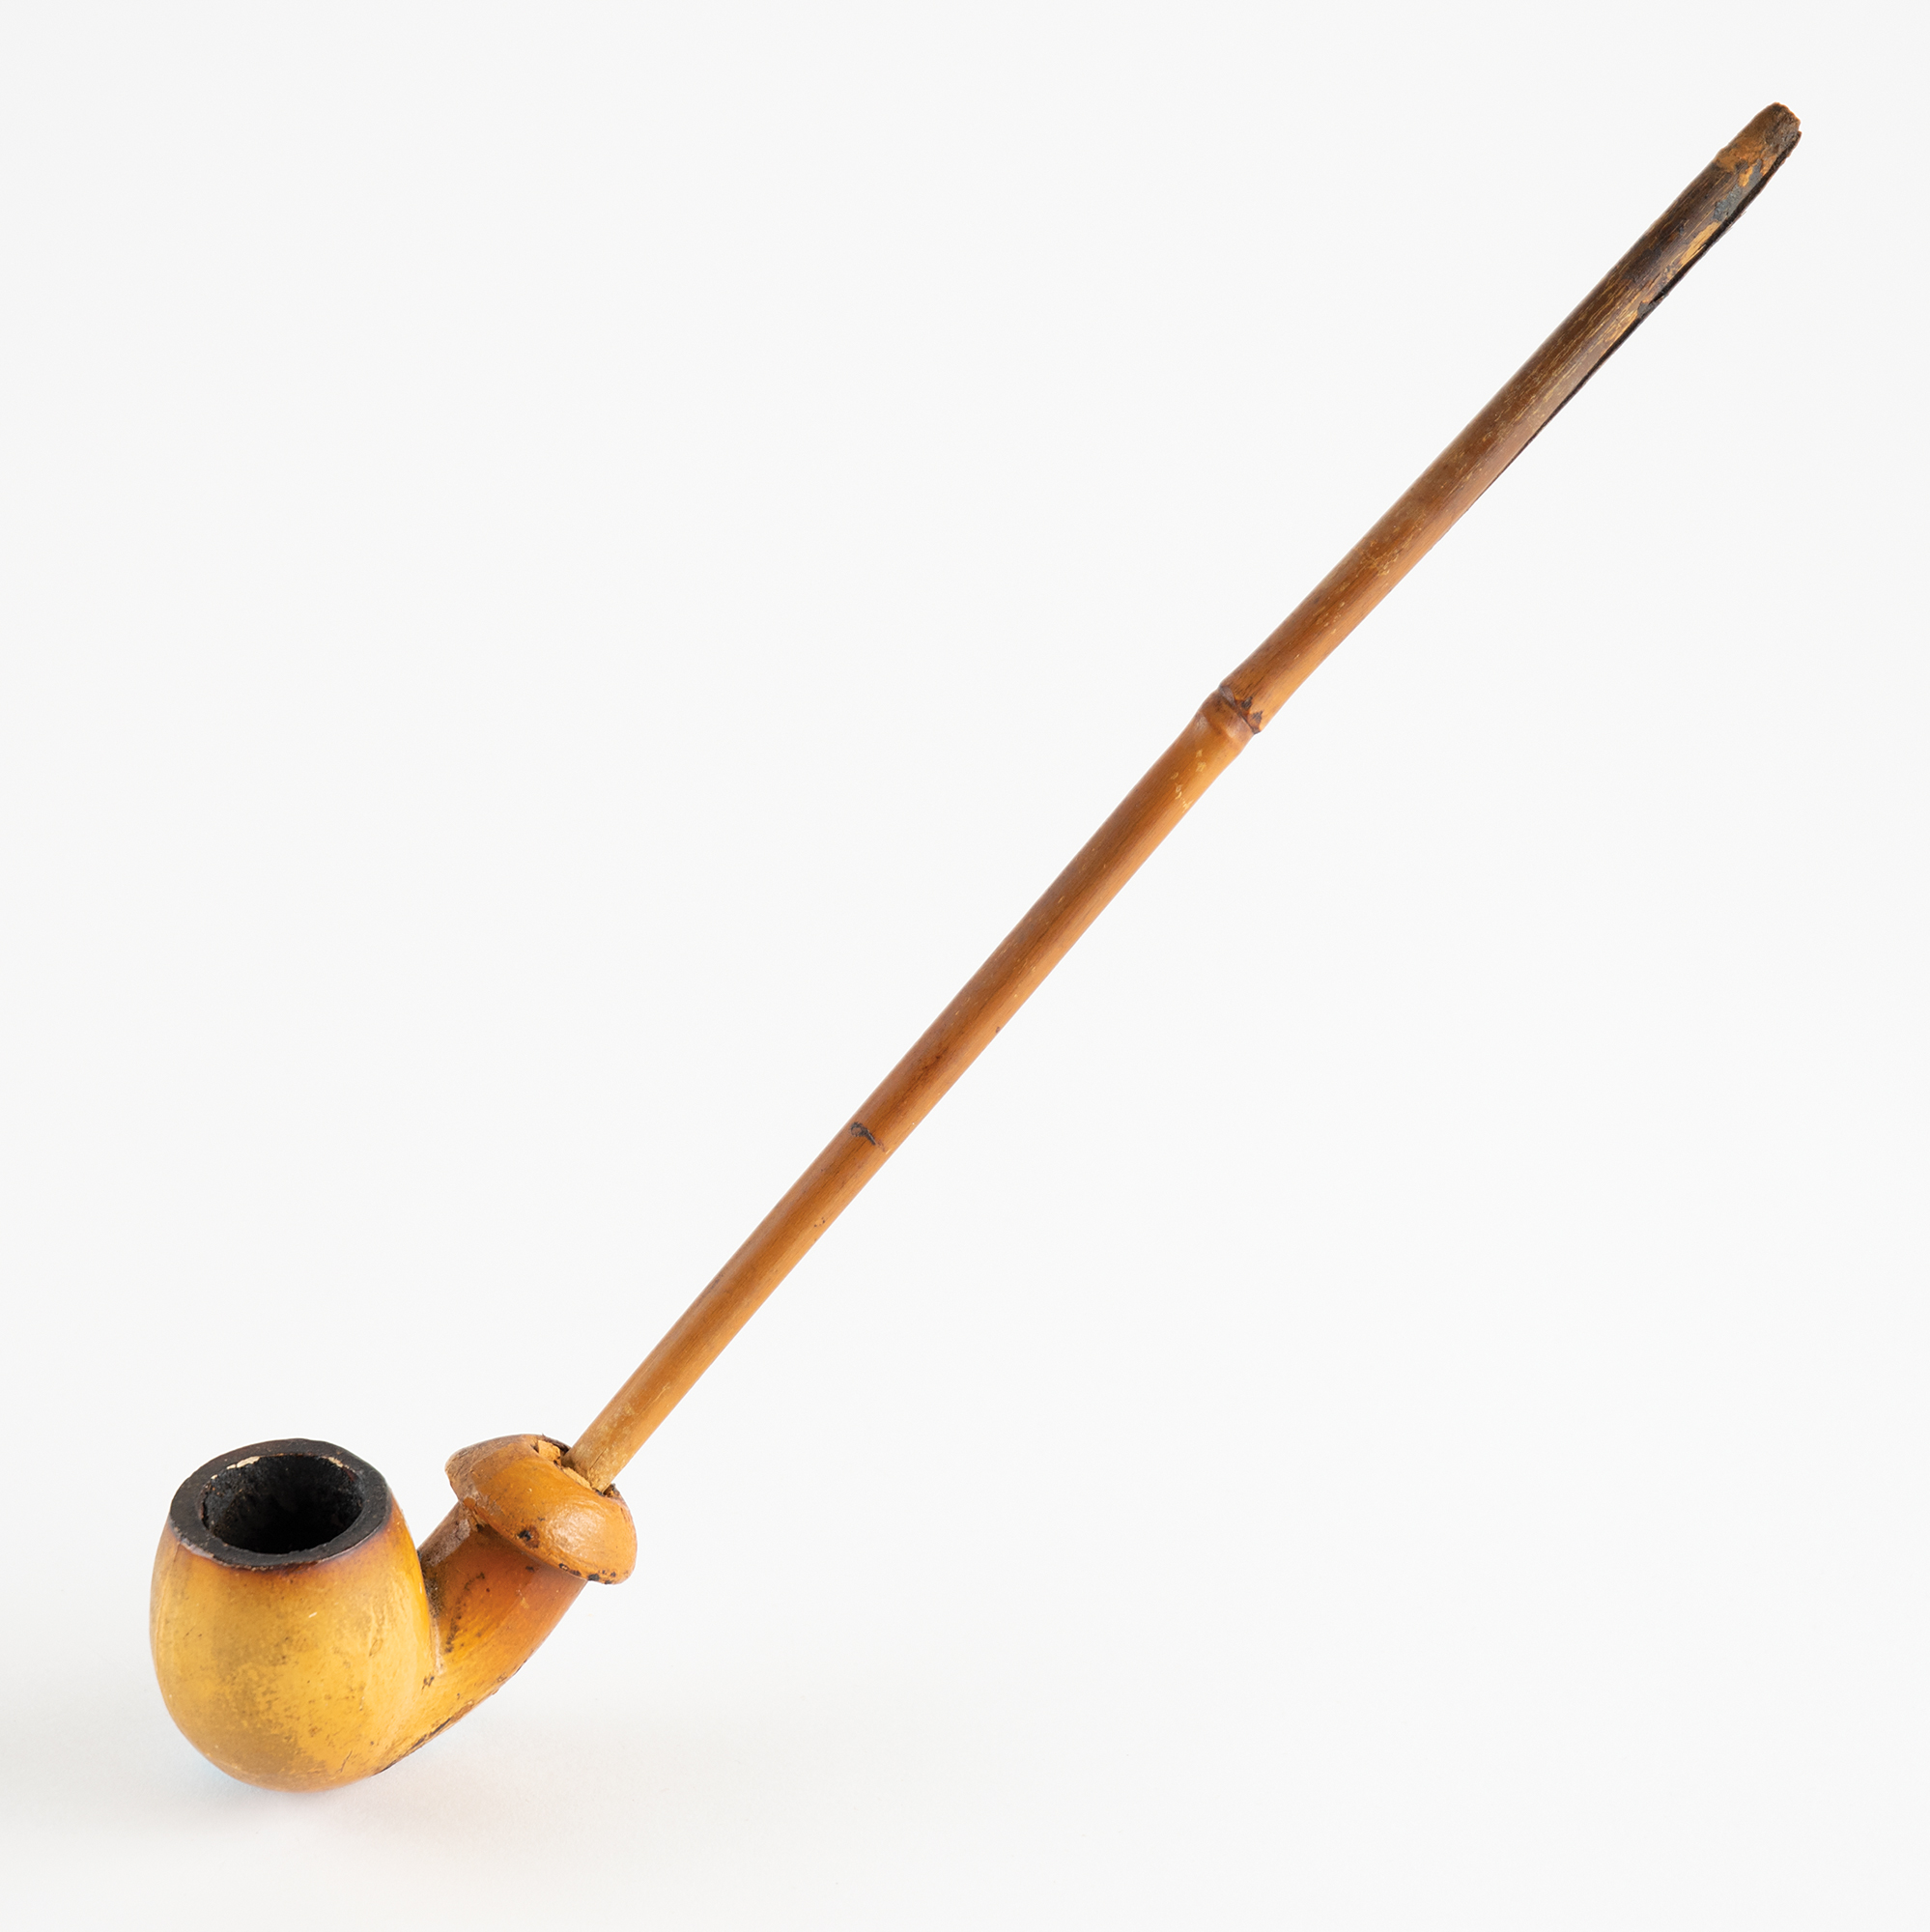 Albert Einsteins 9 Pipes And Menorah Pipe Holder Rr Auction